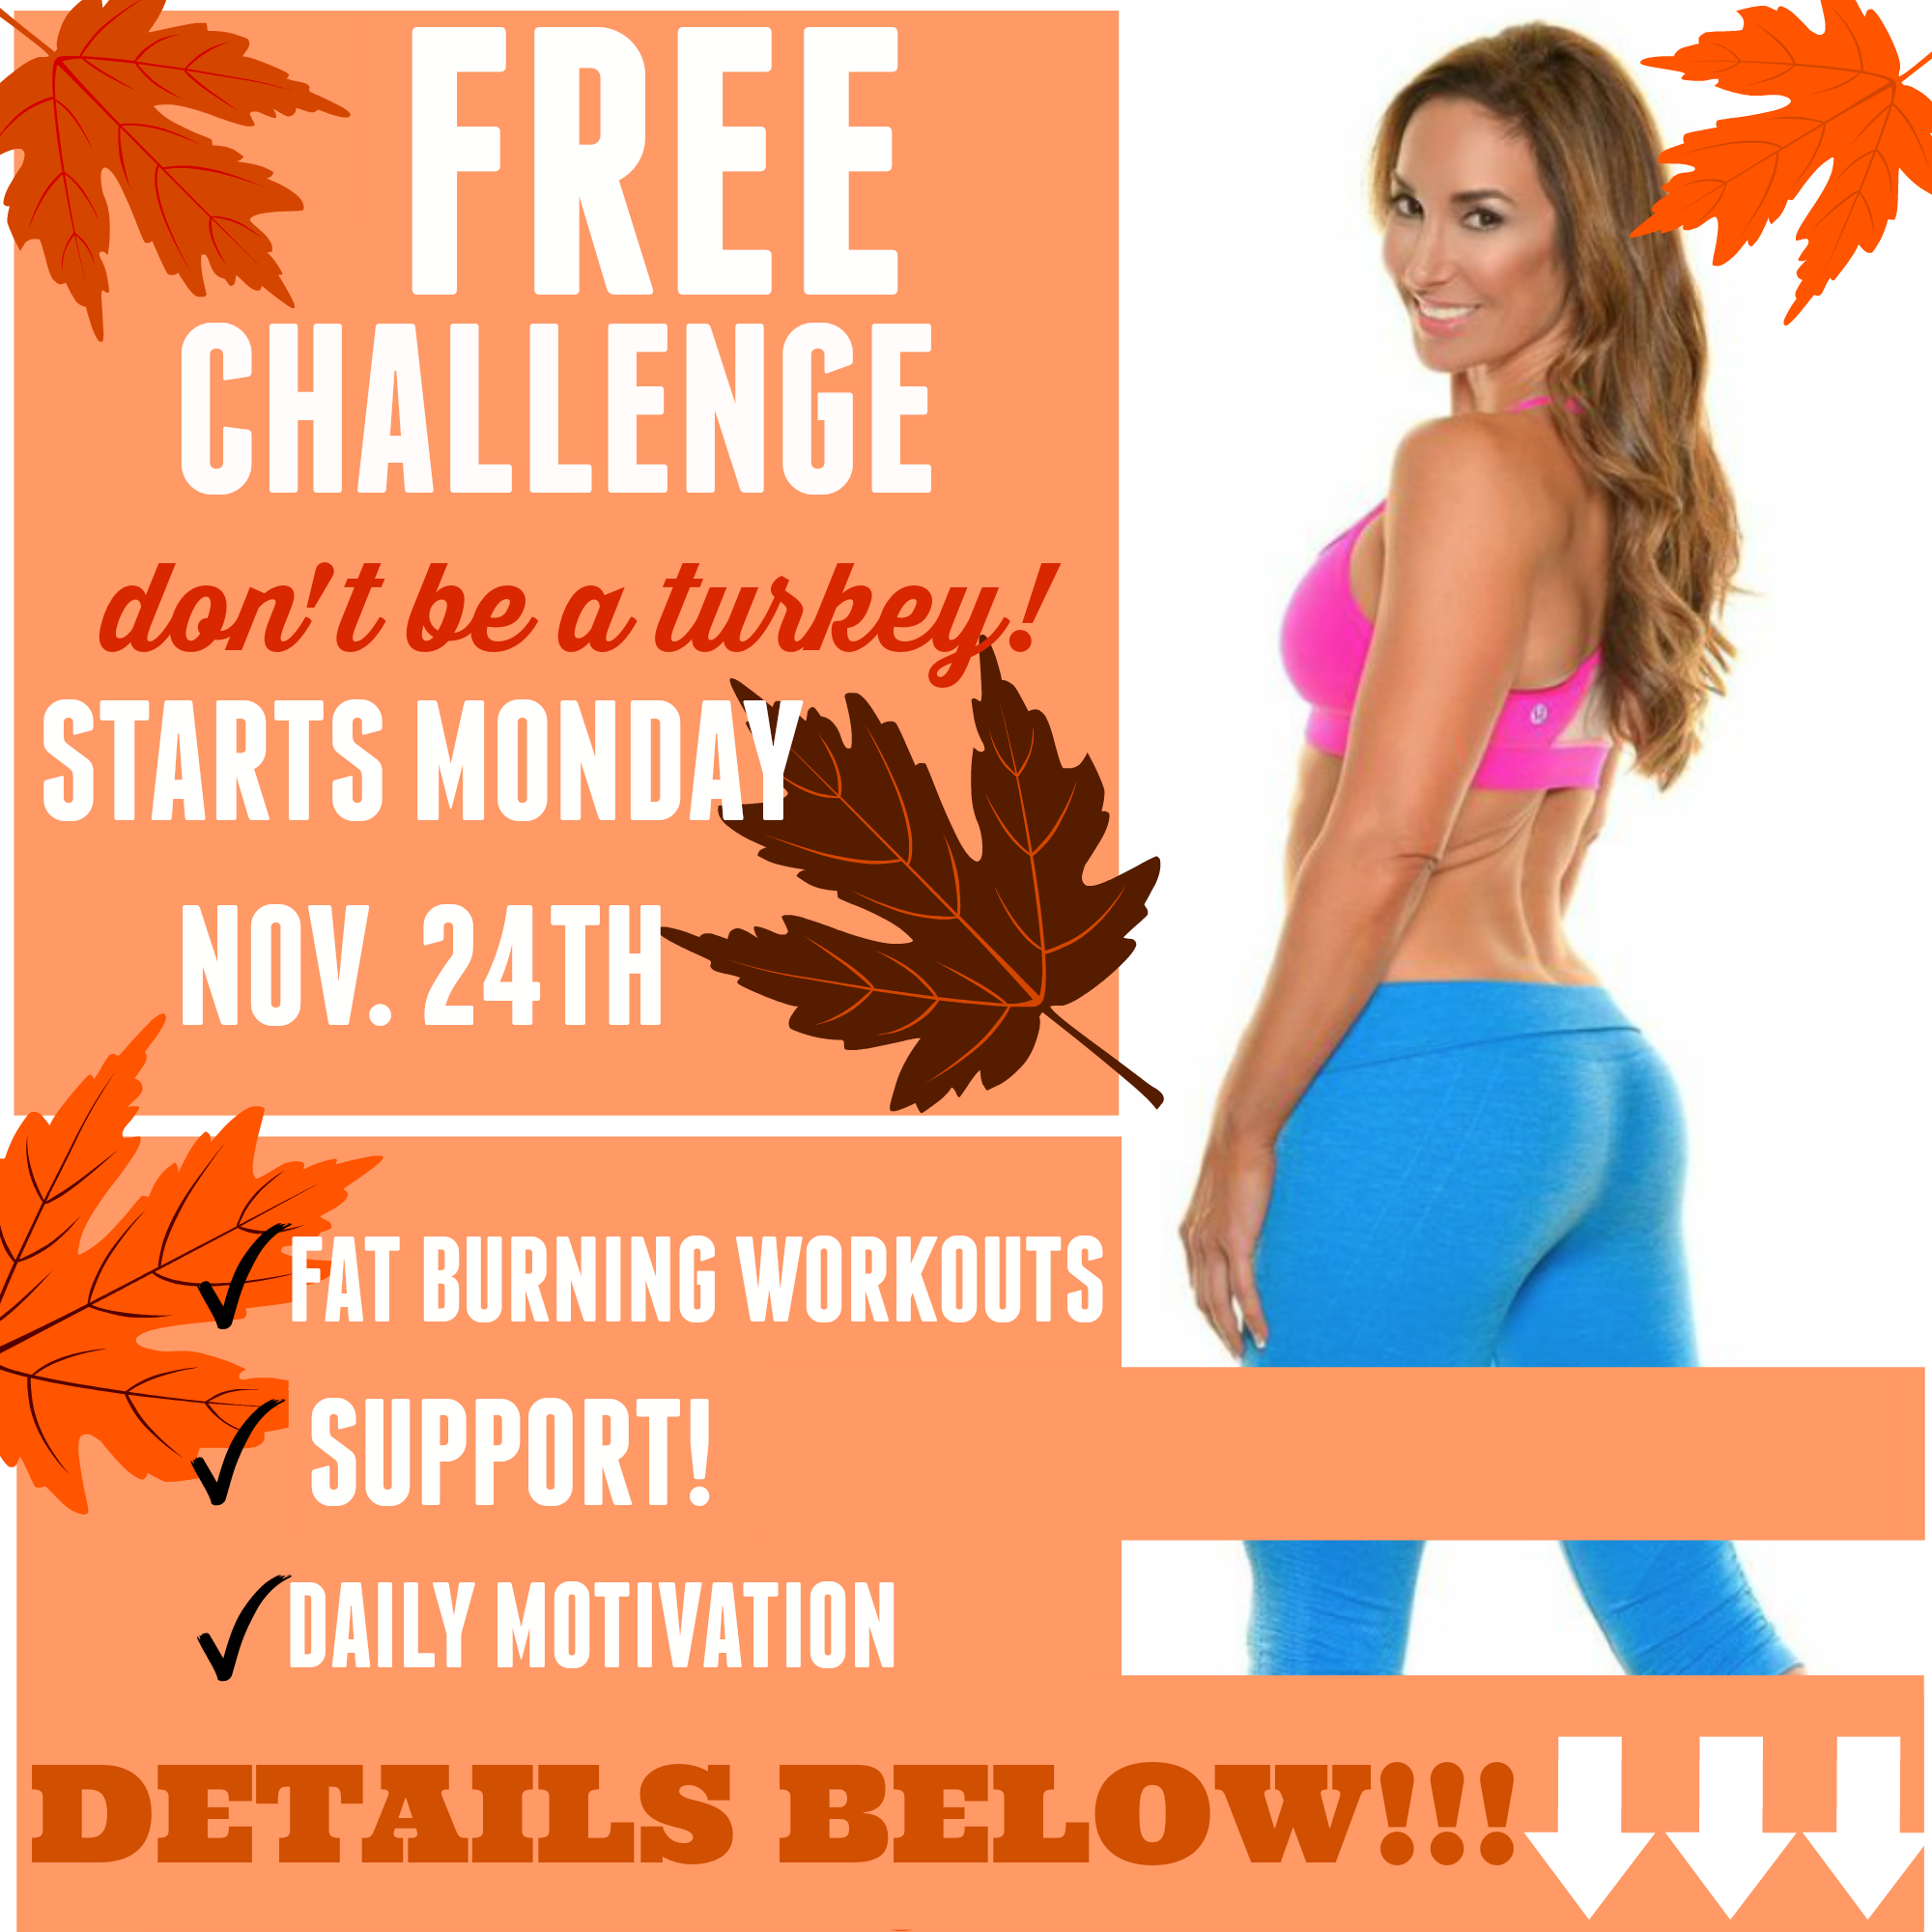 FREE Workout of the Week: The Perform Better Challenge! - Workout